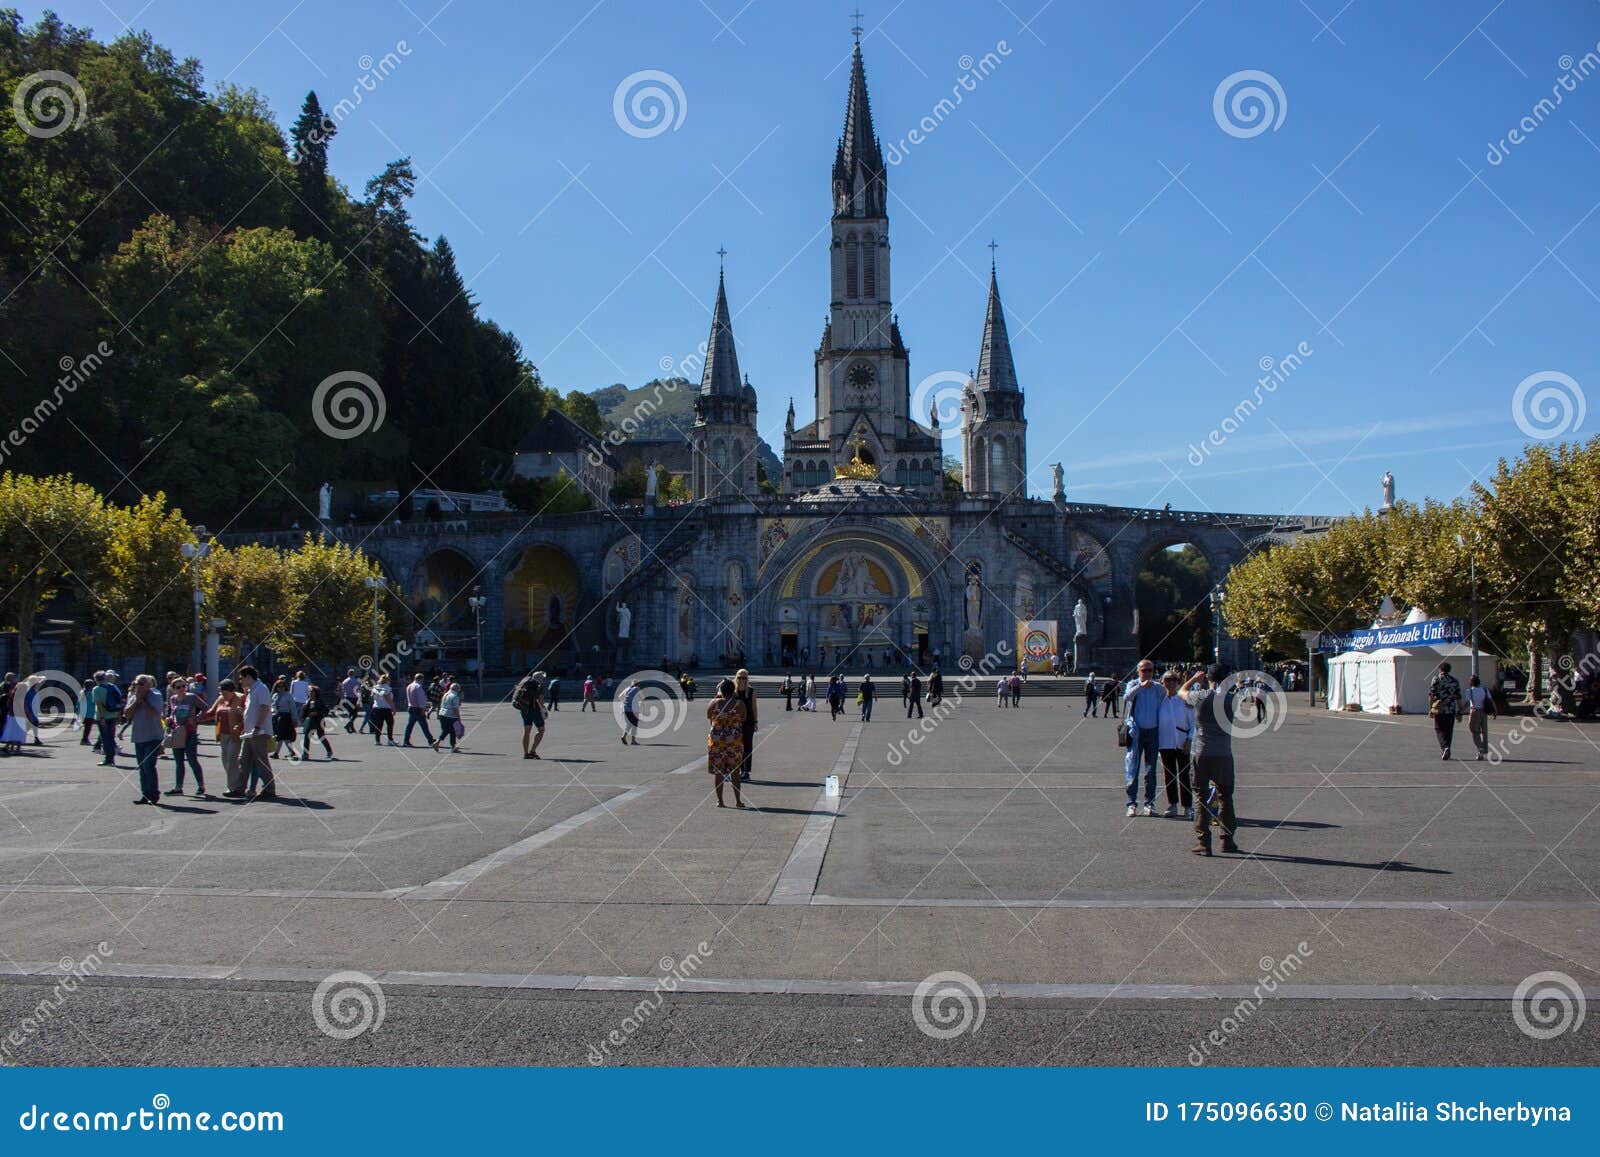 Square with People in Front of Sanctuary of Our Lady in Lourdes, France ...